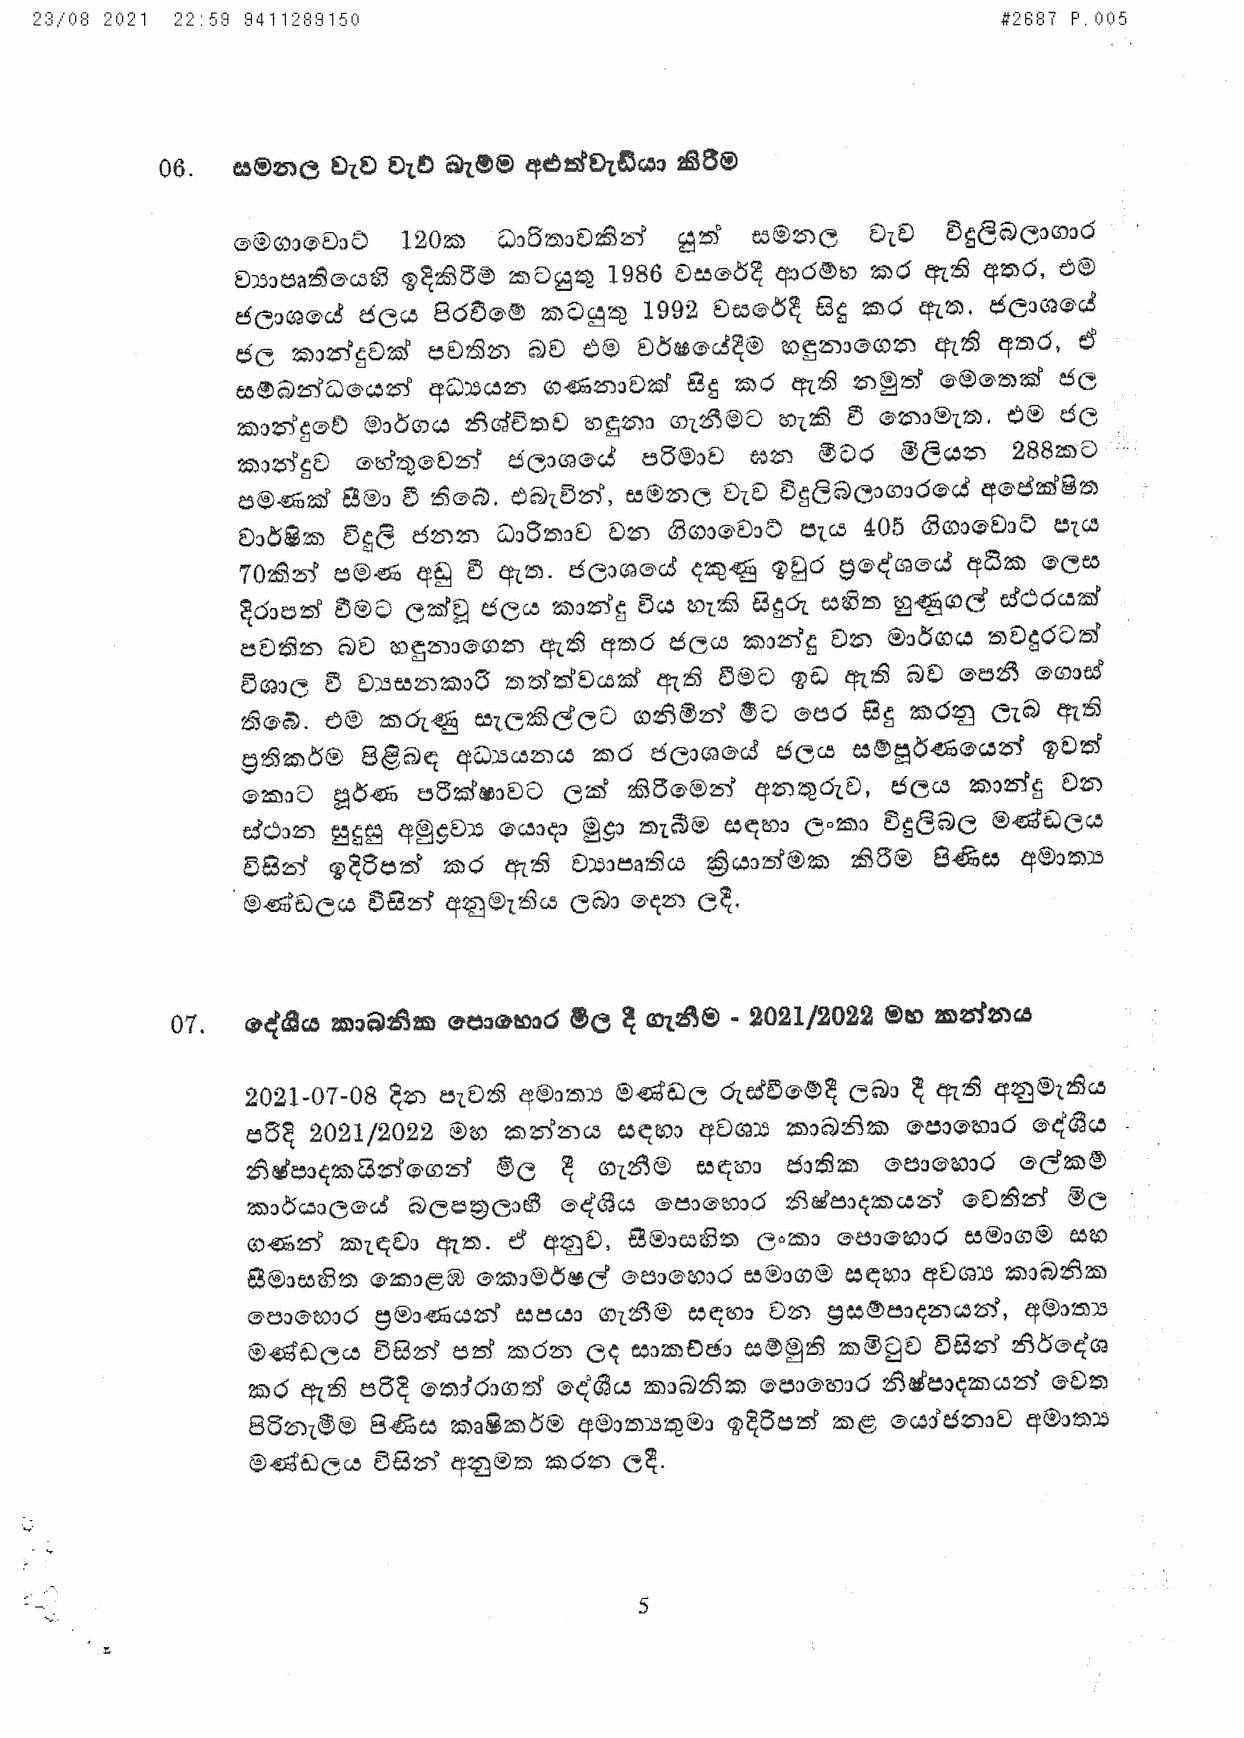 Cabinet Decision on 23.08.2021 page 001